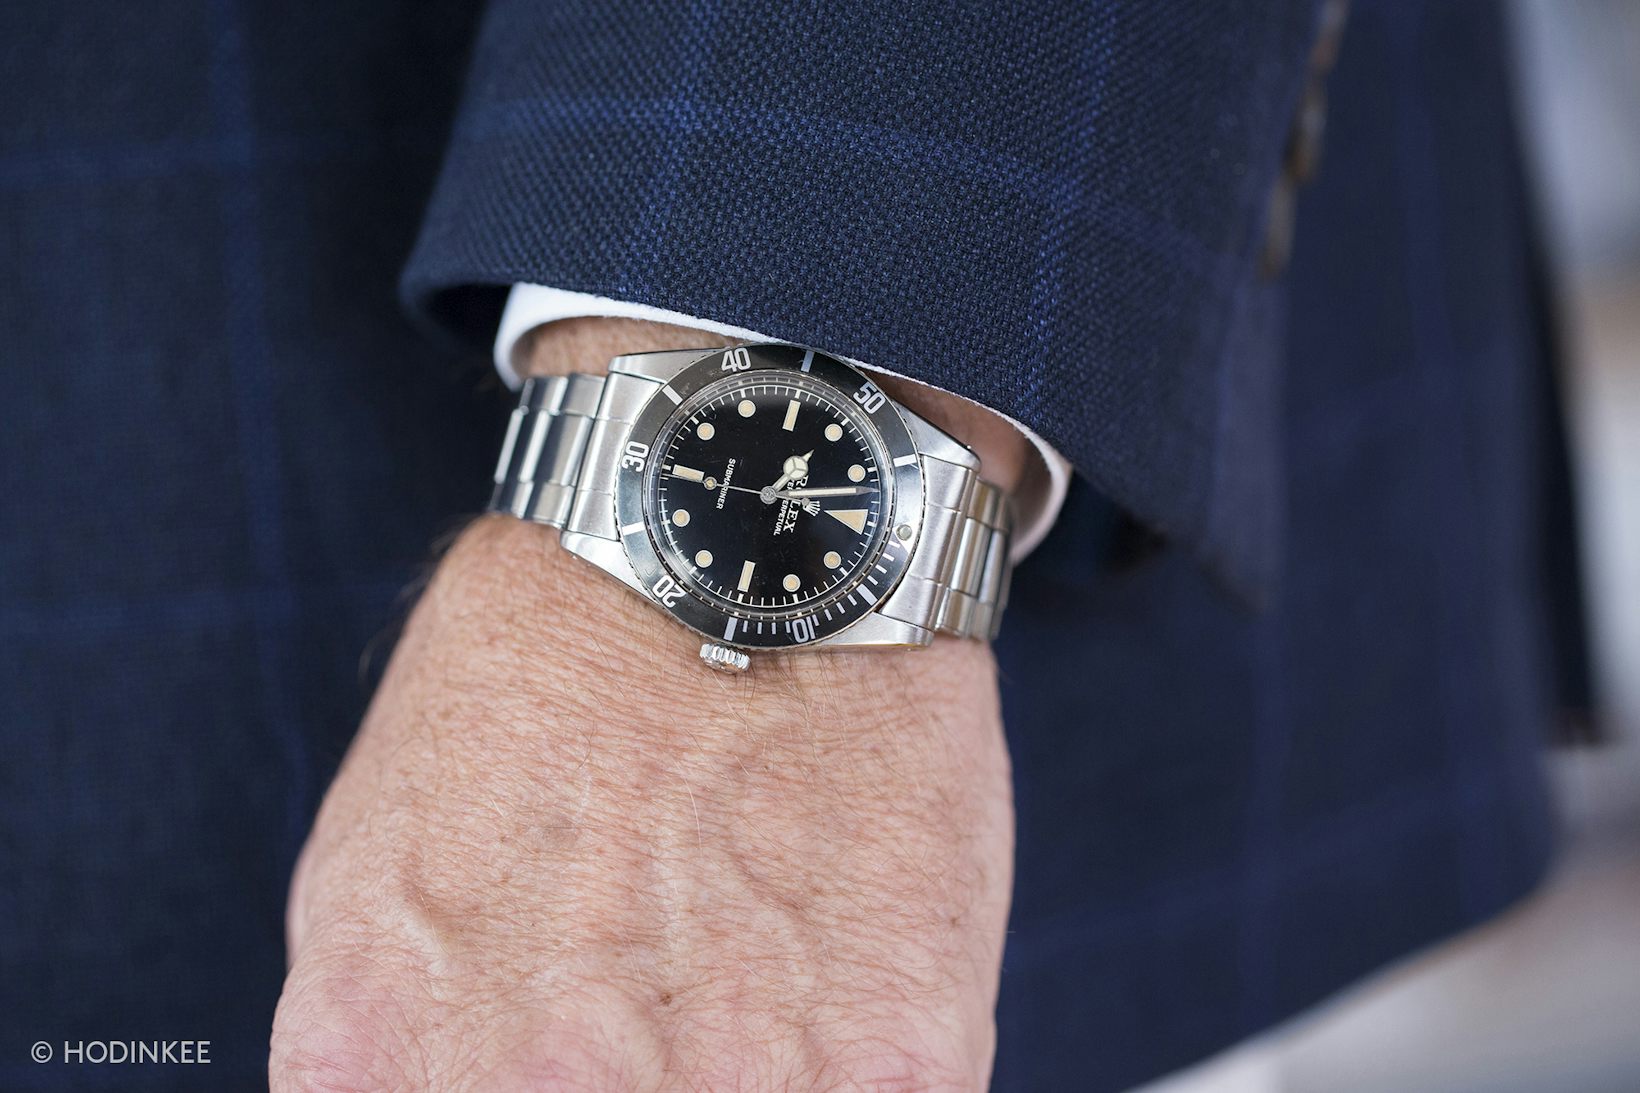 His first Breitling Navitimer taught UK's George Bamford to tinker